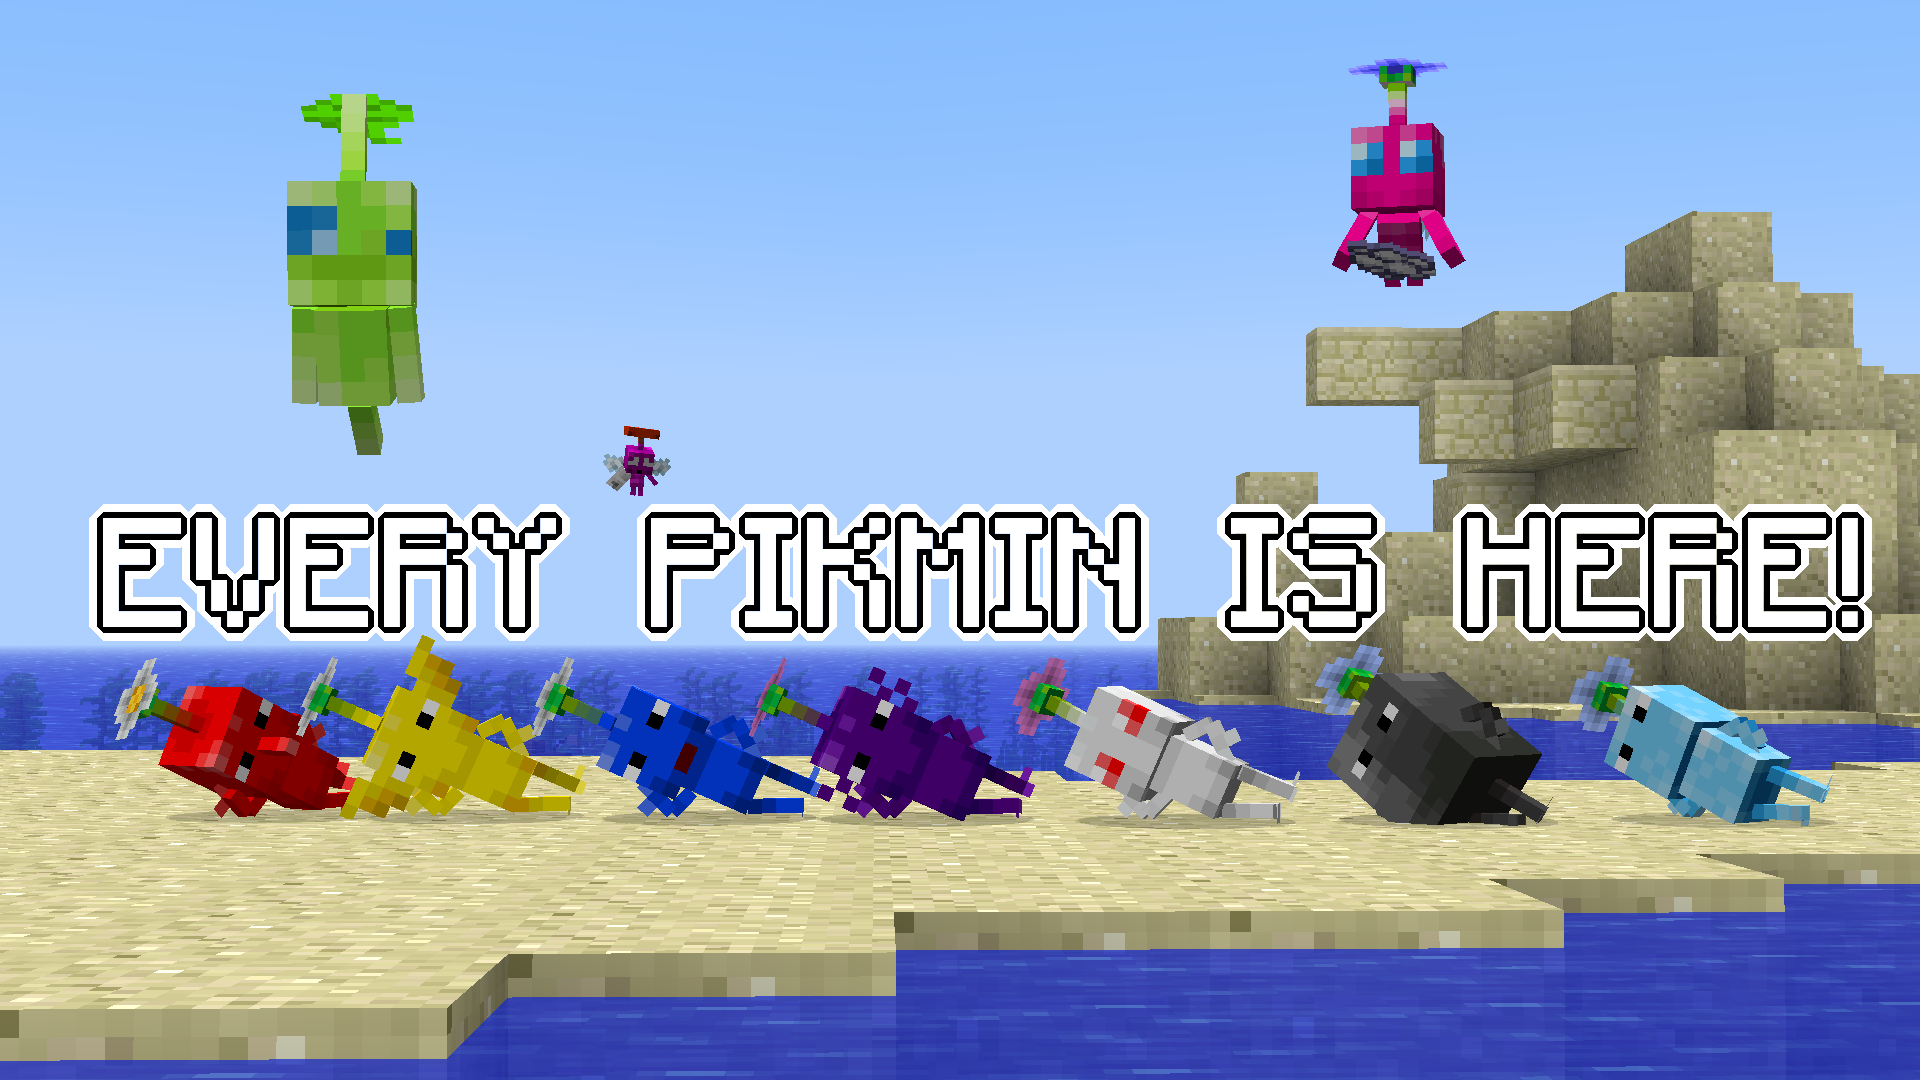 Every pikmin is here!!